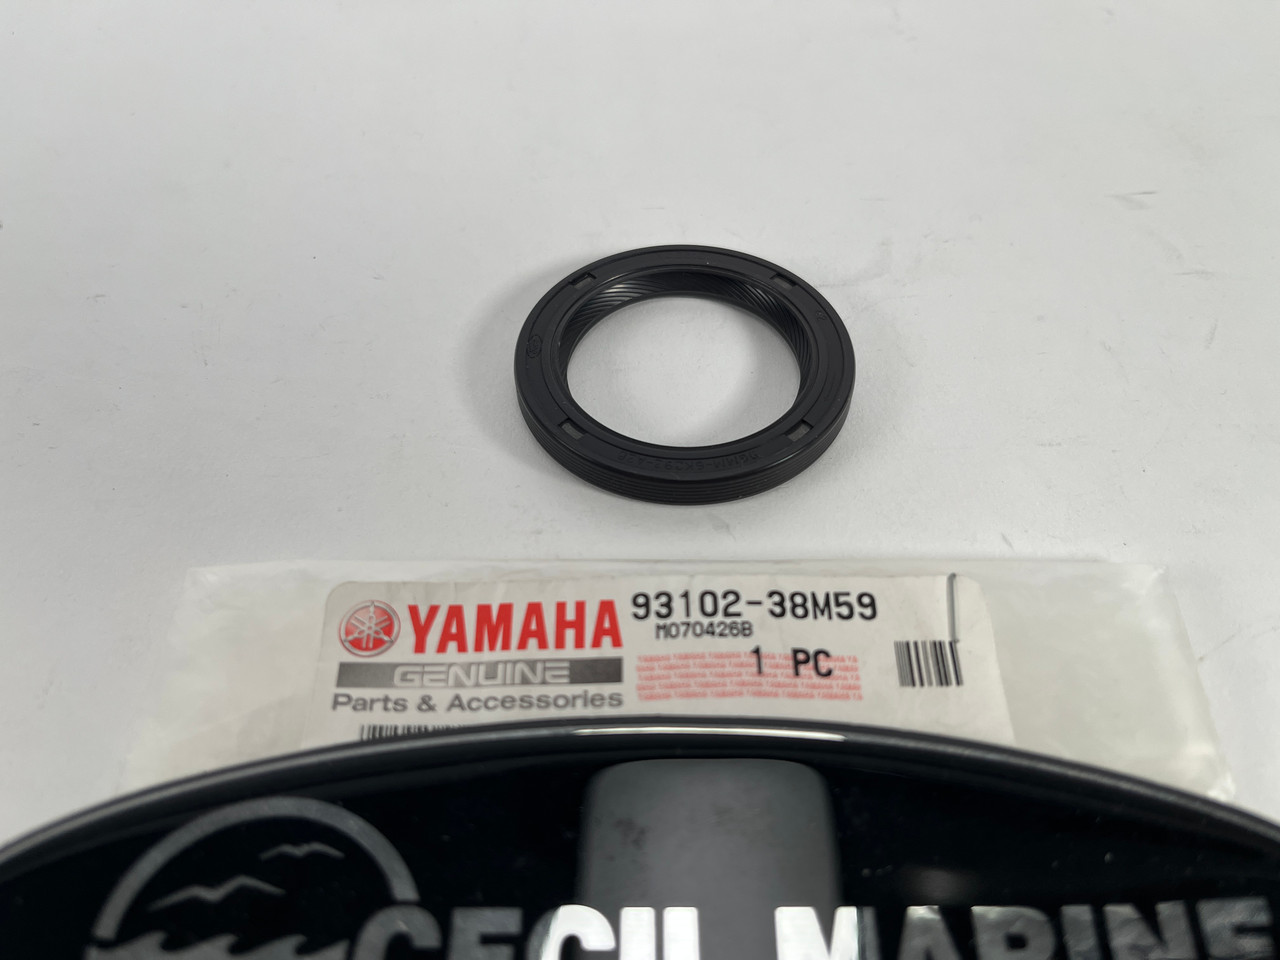 $21.99* GENUINE YAMAHA no tax* OIL SEAL 93102-38M59-00 *In Stock & Ready To Ship